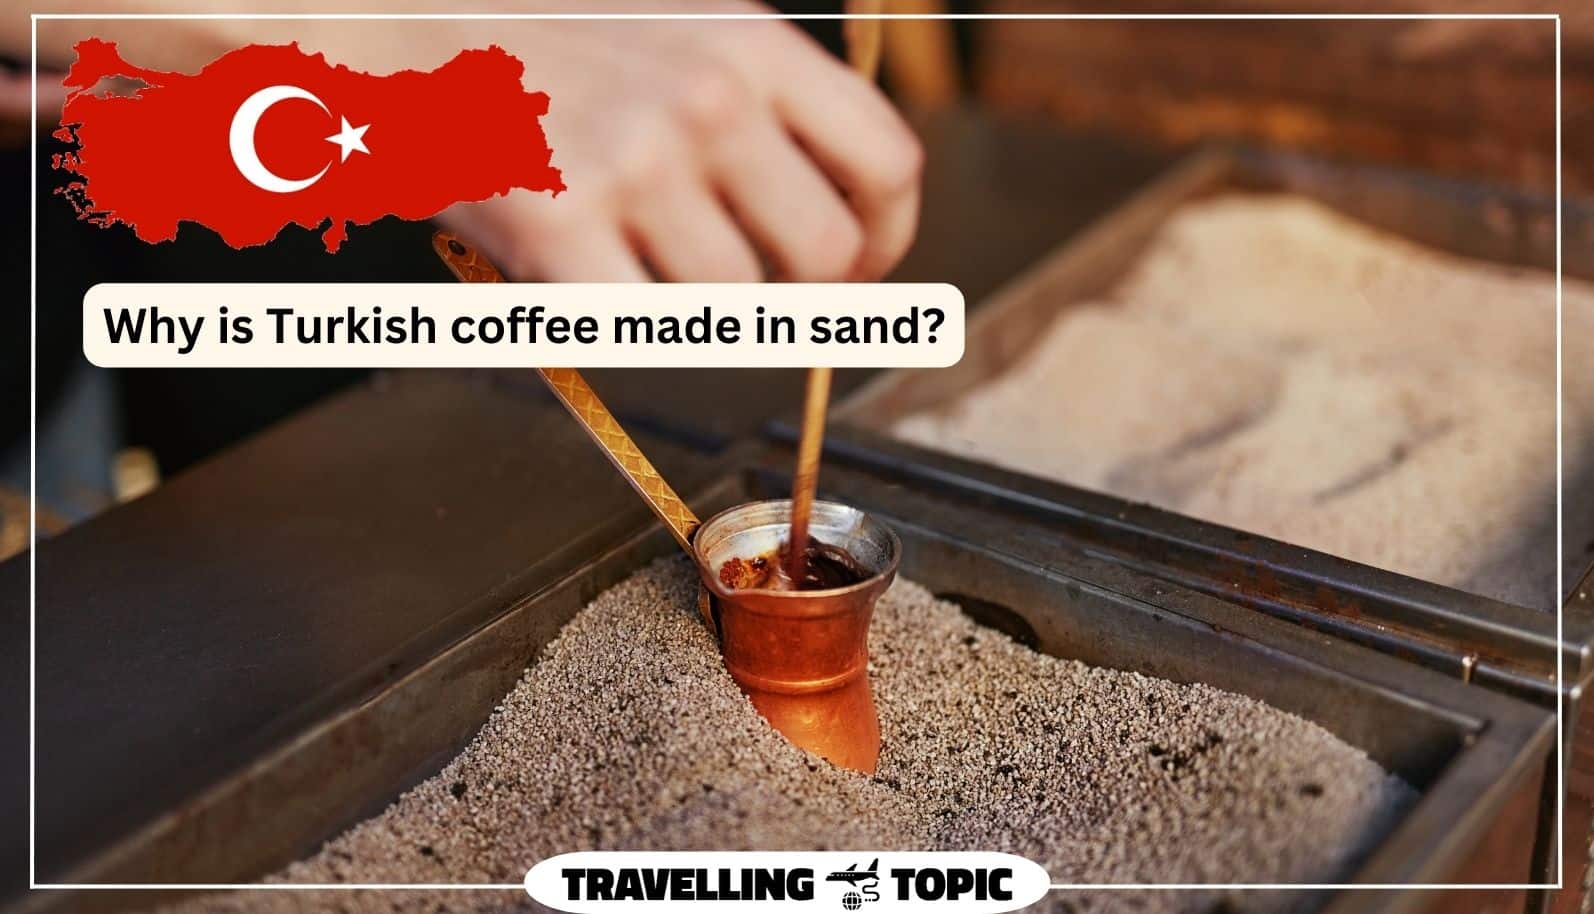 Why is Turkish coffee made in sand